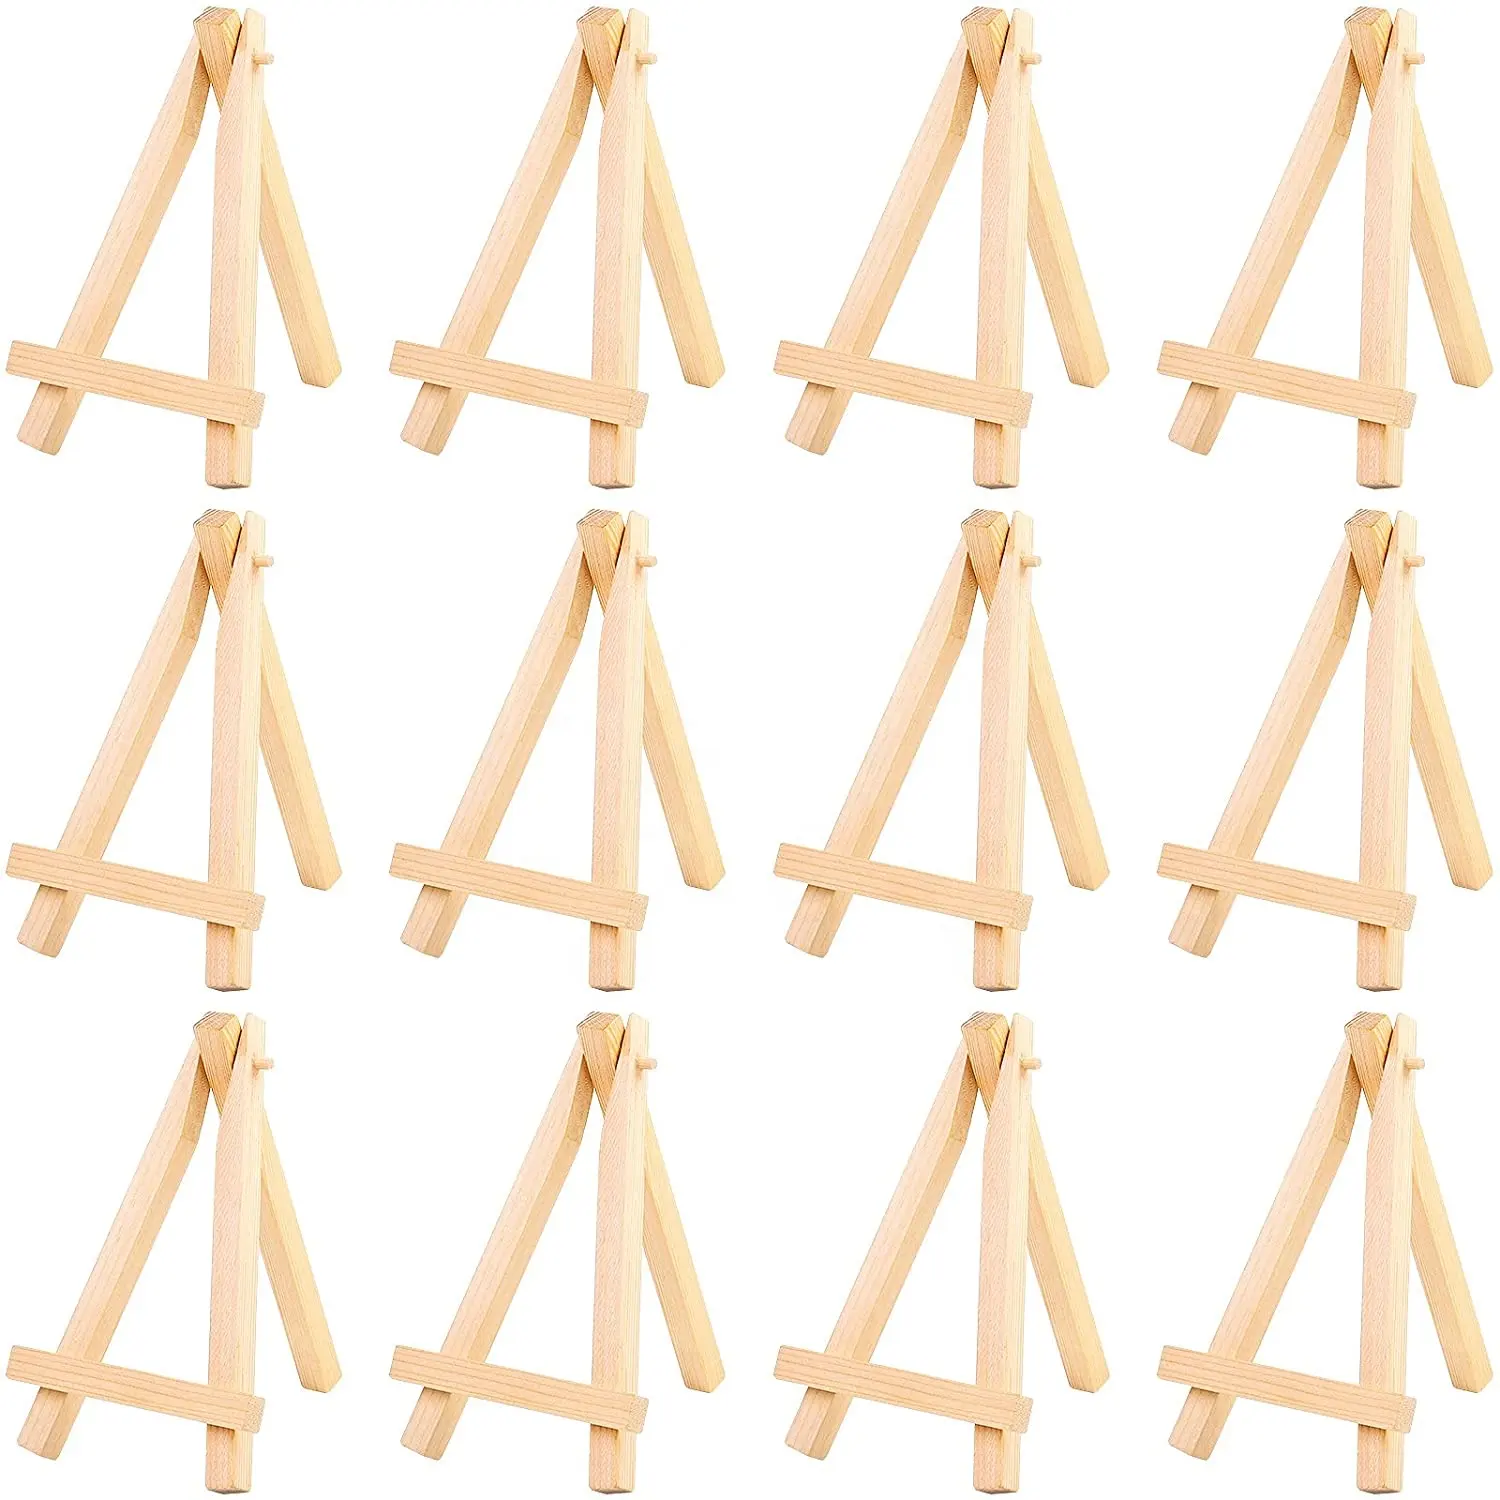 12-piece mini wooden easel, adjustable table top easel. Display artist easel stand, table frame can be folded A frame wooden eas